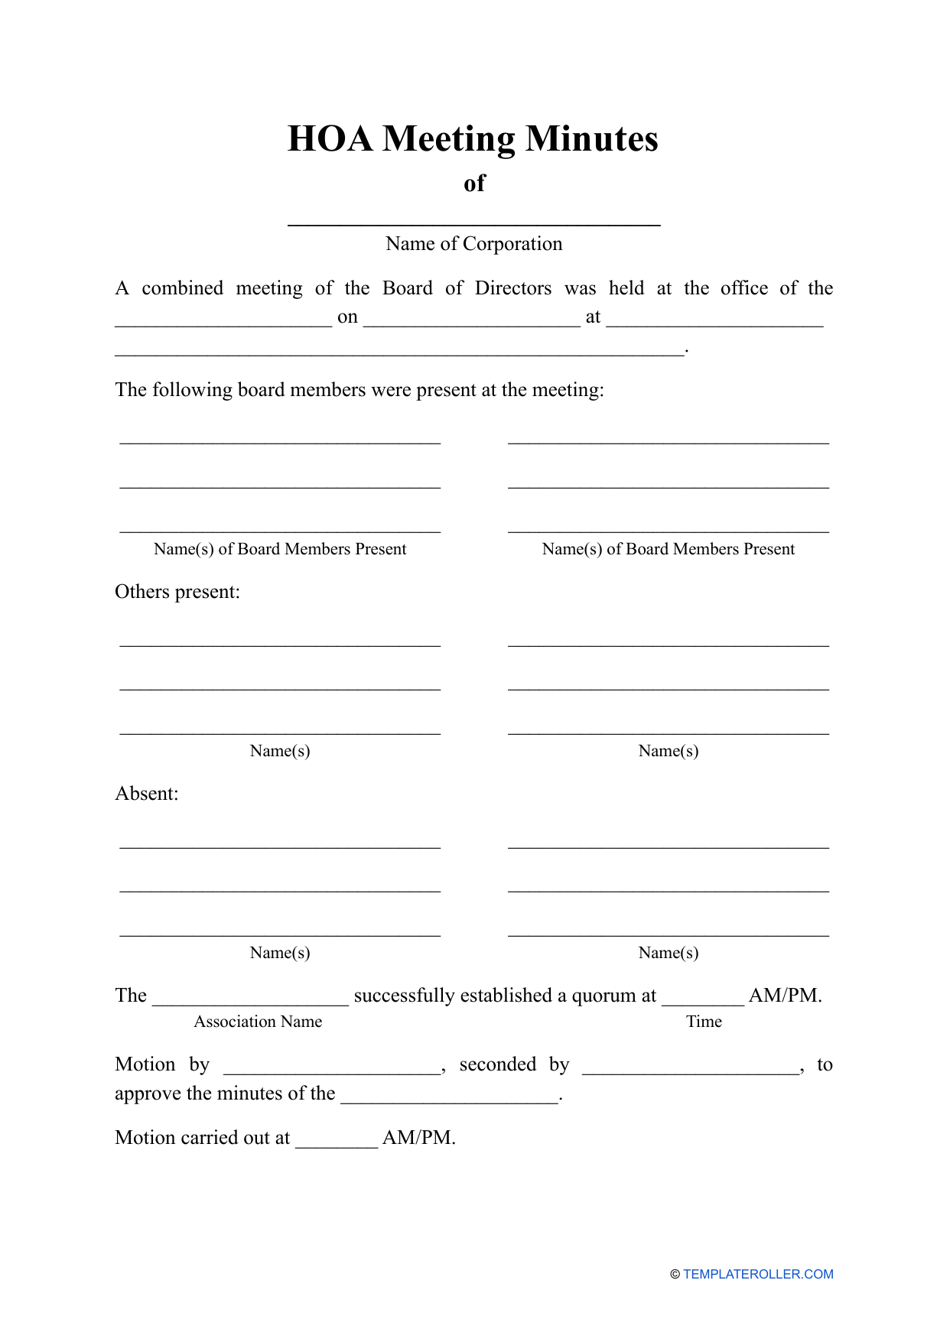 Hoa Meeting Minutes Template, Page 1